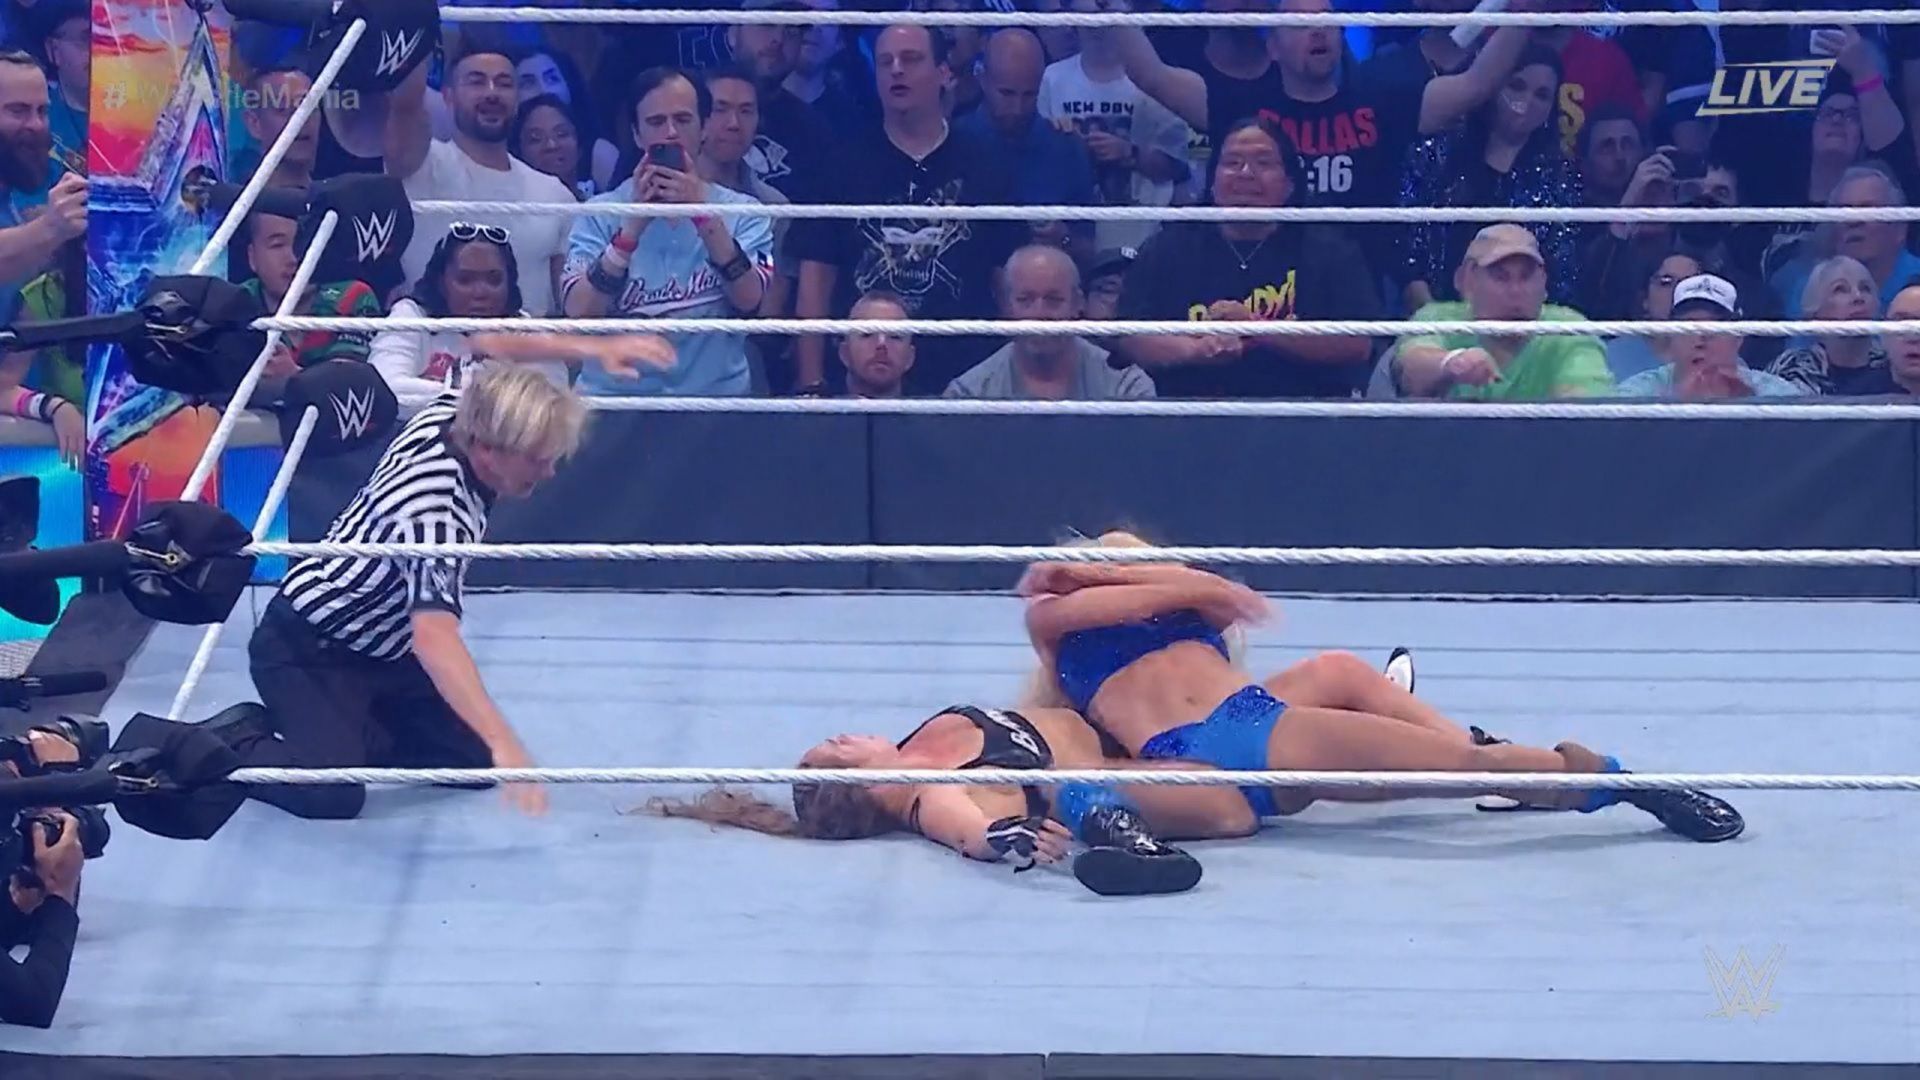 Charlotte Flair pinned Ronda Rousey at WrestleMania 38